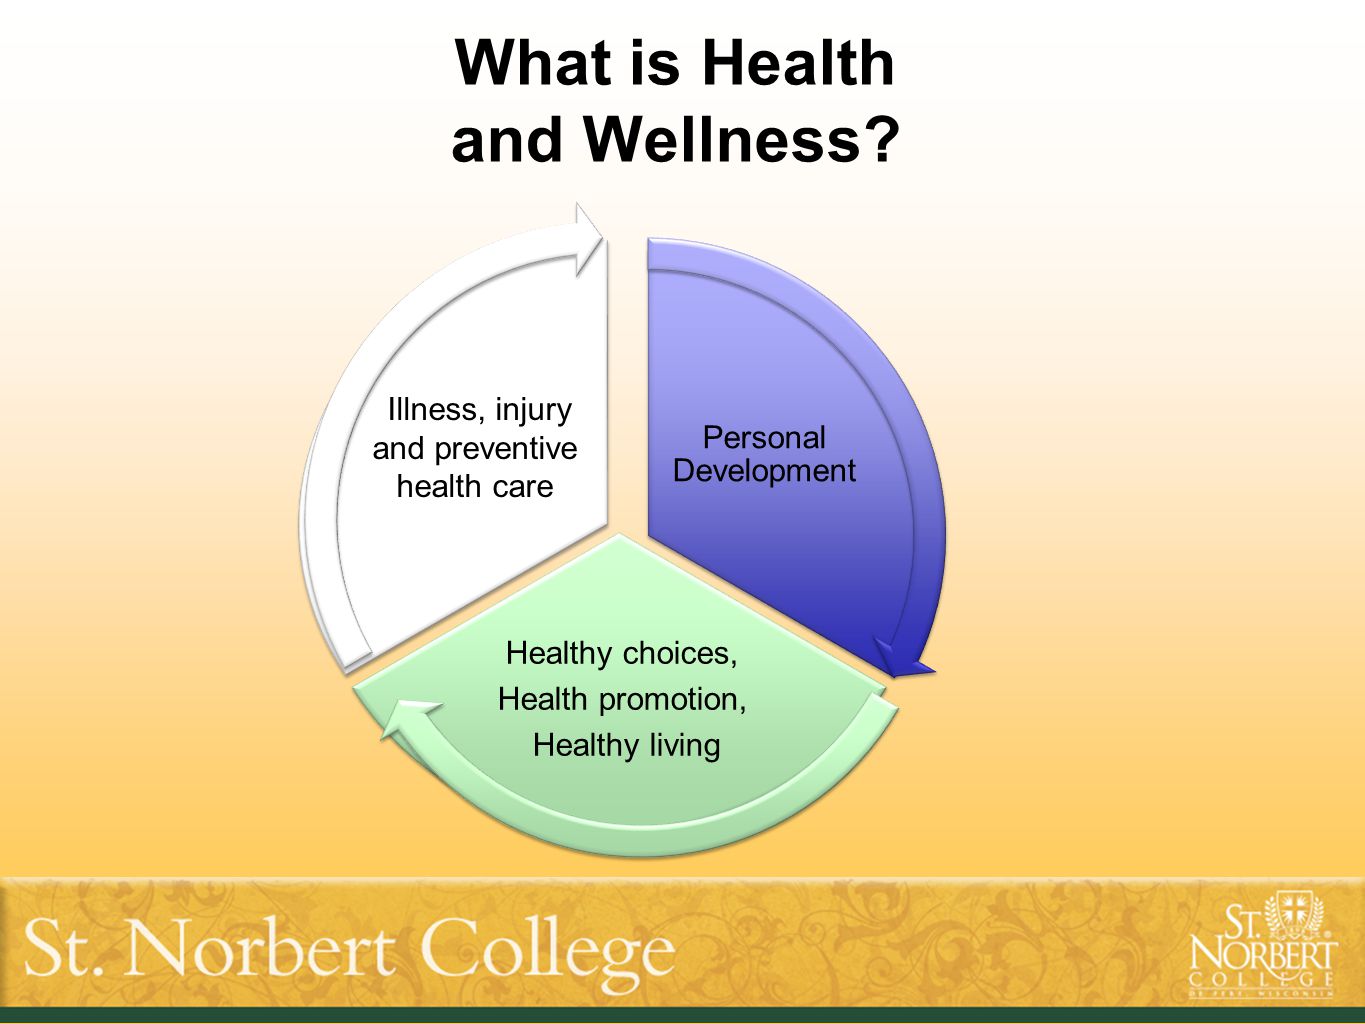 Personal Development Healthy choices, Health promotion, Healthy living What is Health and Wellness.